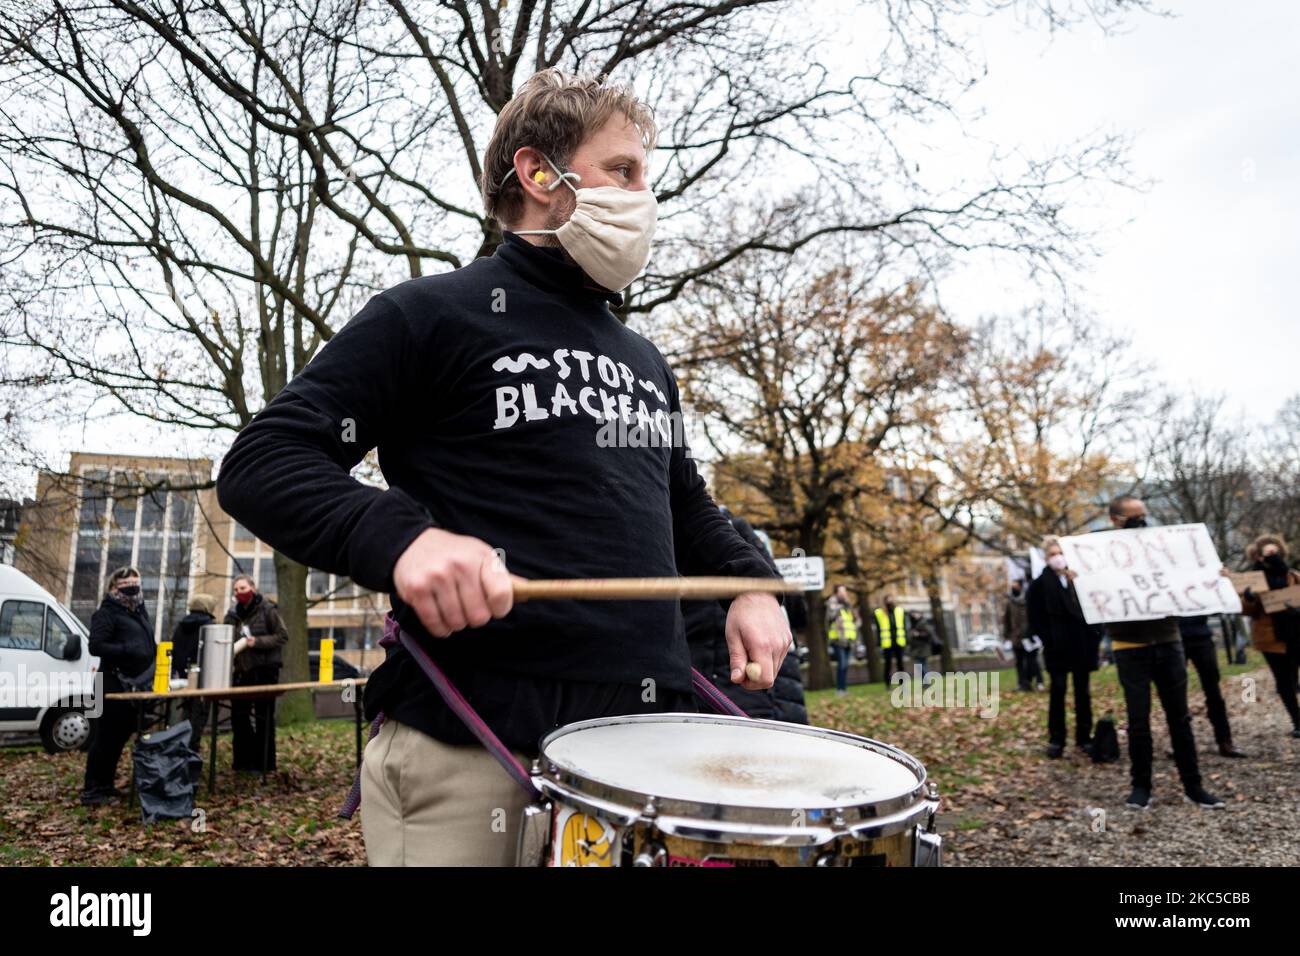 Protester with drums at Koekamp The Hague, Netherlands, on December 6, 2020. Just after the official Sinterklaas (Dutch Santa) celebrations a broad leftwing coalition of mostly climate activists organise a solidarity protest against racism, especially targeted against the use of blackface as Santa's helper. More than thousand people gatherd at the Koekamp, a location near the trainstation. Although these protest most of the are met with rightwing counterprotesters the demonstration was without incidents. (Photo by Oscar Brak/NurPhoto) Stock Photo